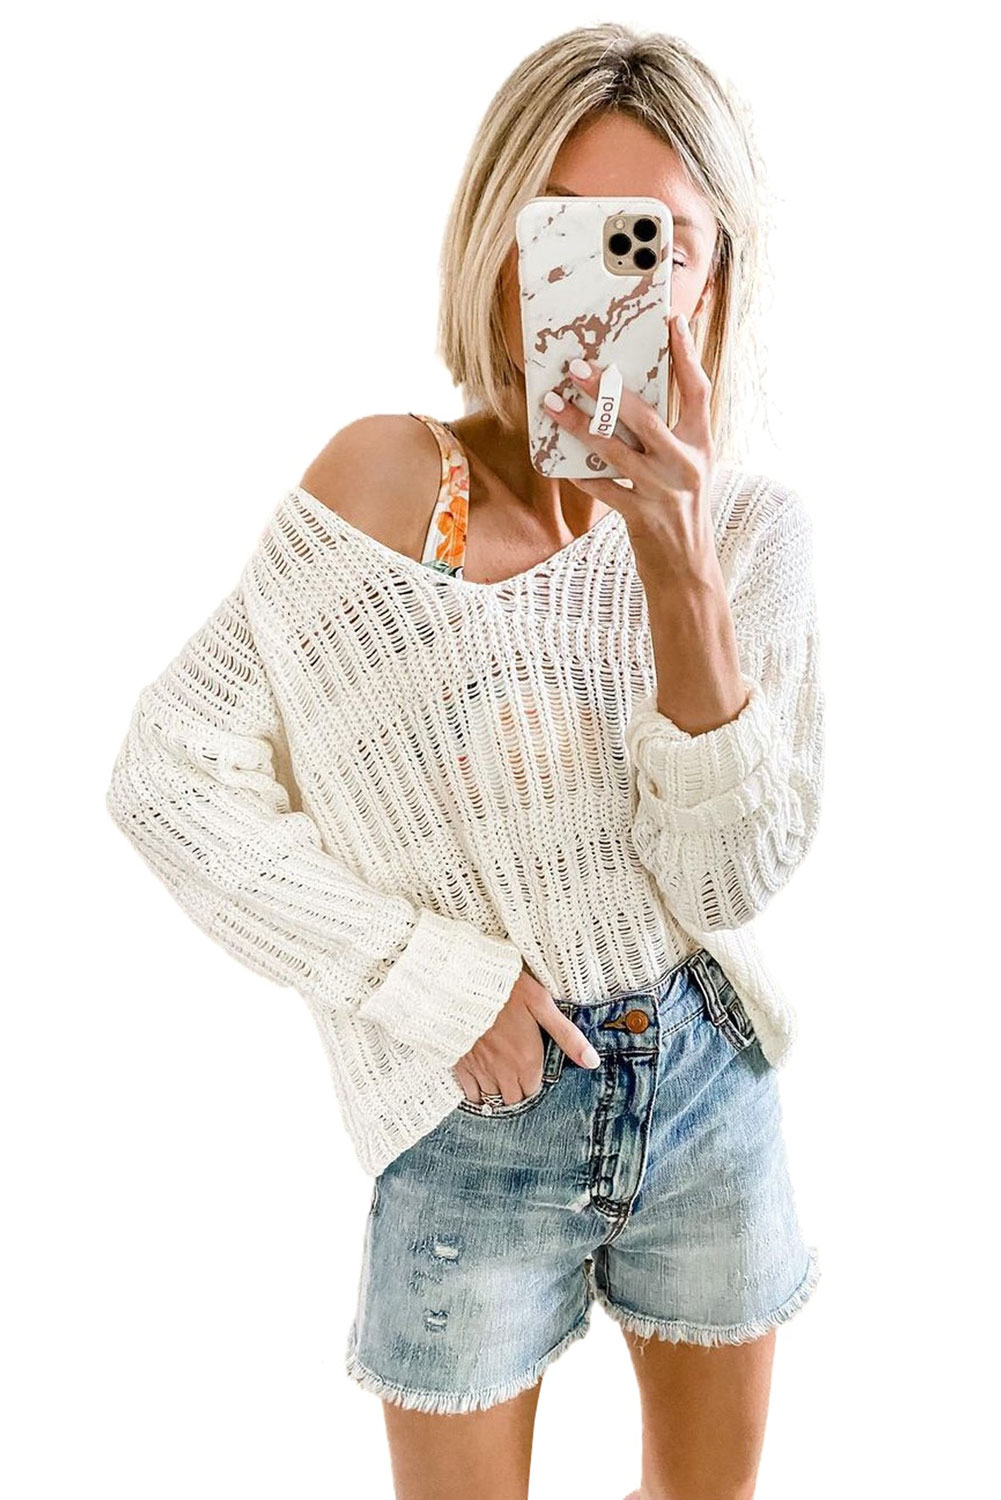 White Loose Long Sleeve V Neck Open Knit Sweater